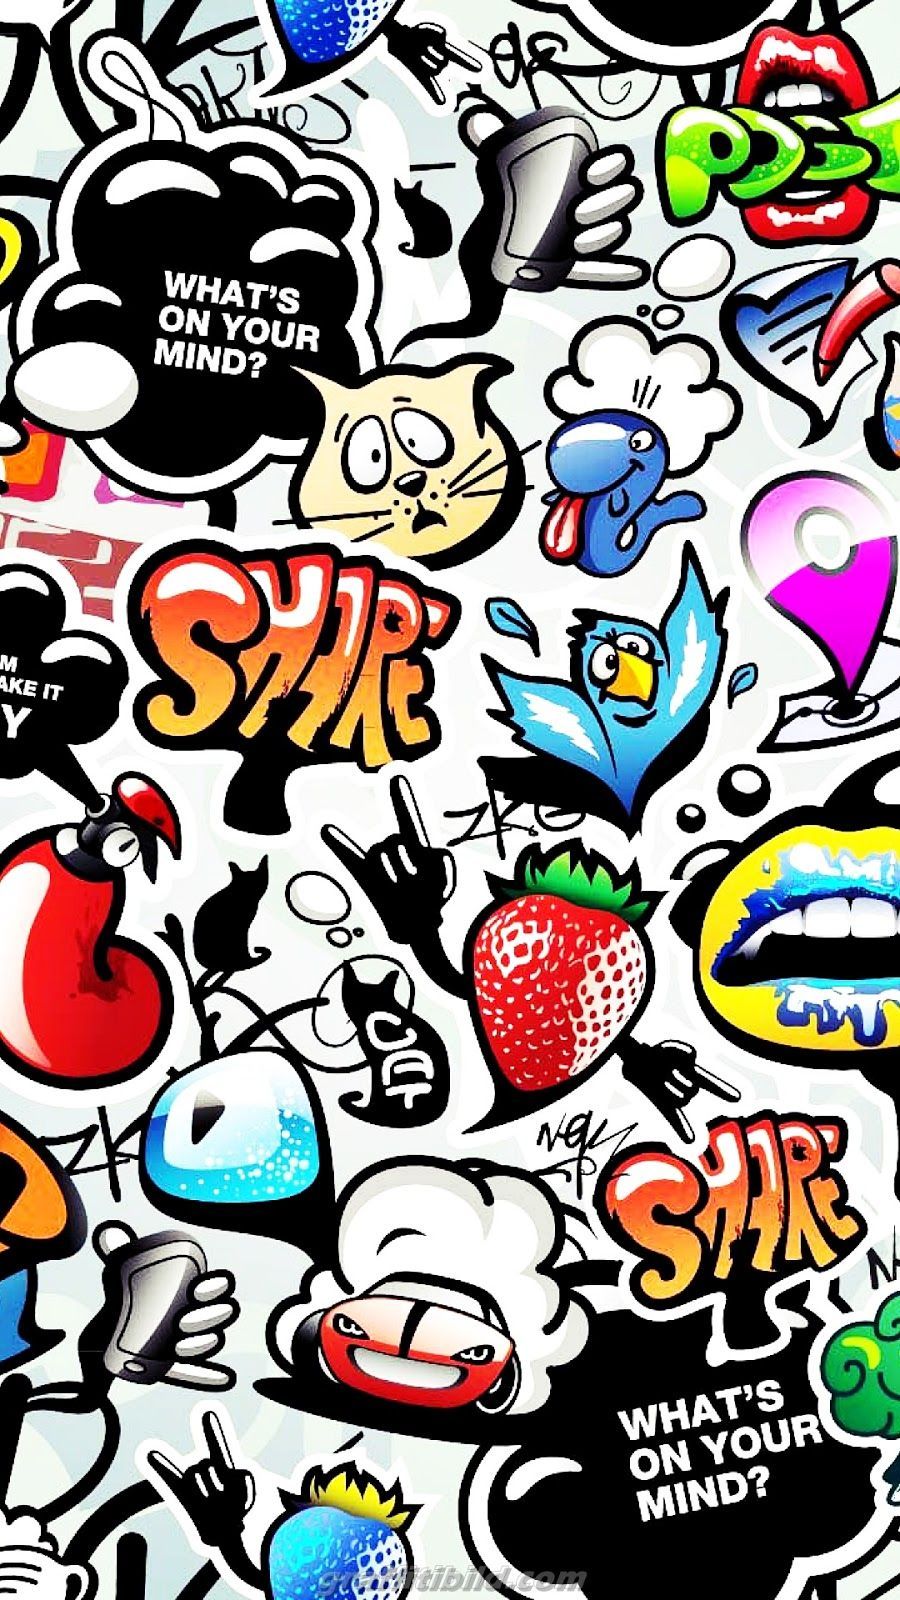 Grafffiti wallpapers hd for android free download. Cool wallpapers